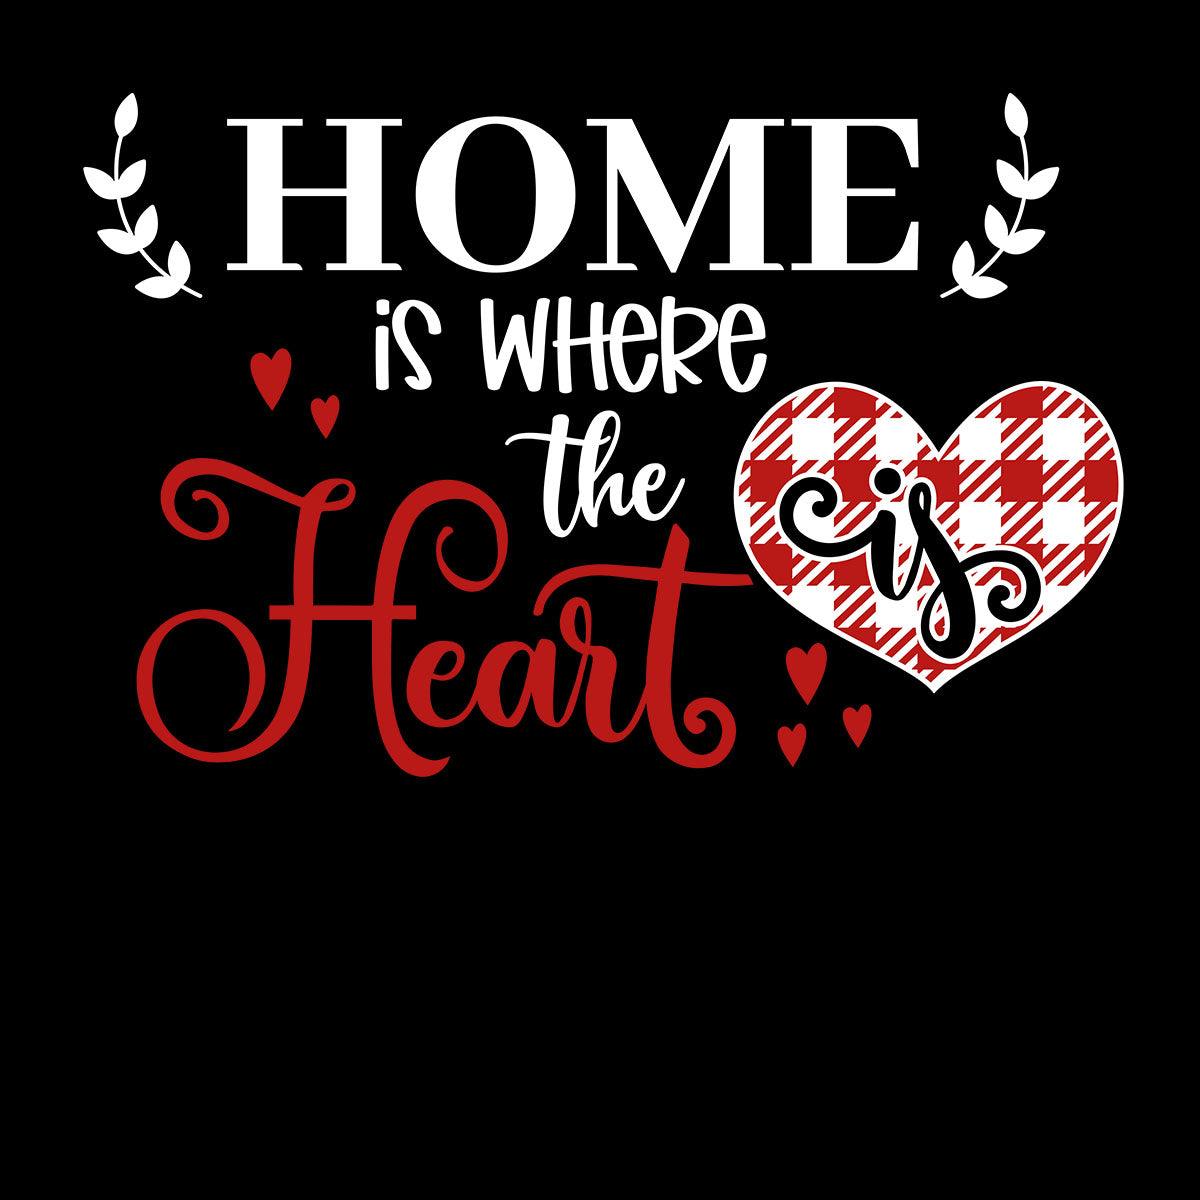 Home is where the heart is Valentines Love T-shirt for men Unisex T-Shirt - Kuzi Tees